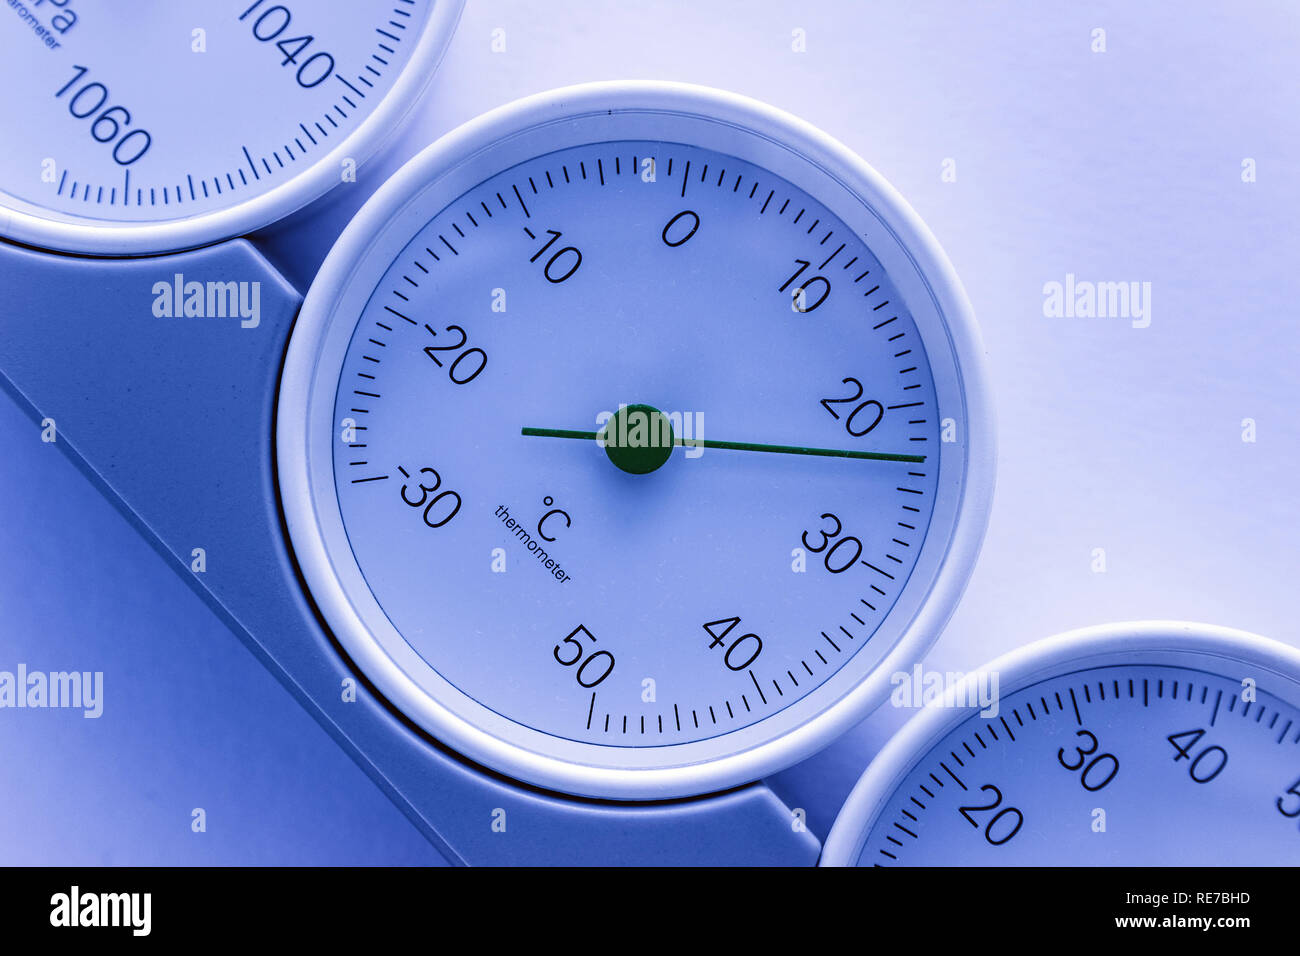 modern, round barometer, thermometer, hygrometer. Analog device for measuring humidity, temperature and atmospheric pressure. Stock Photo